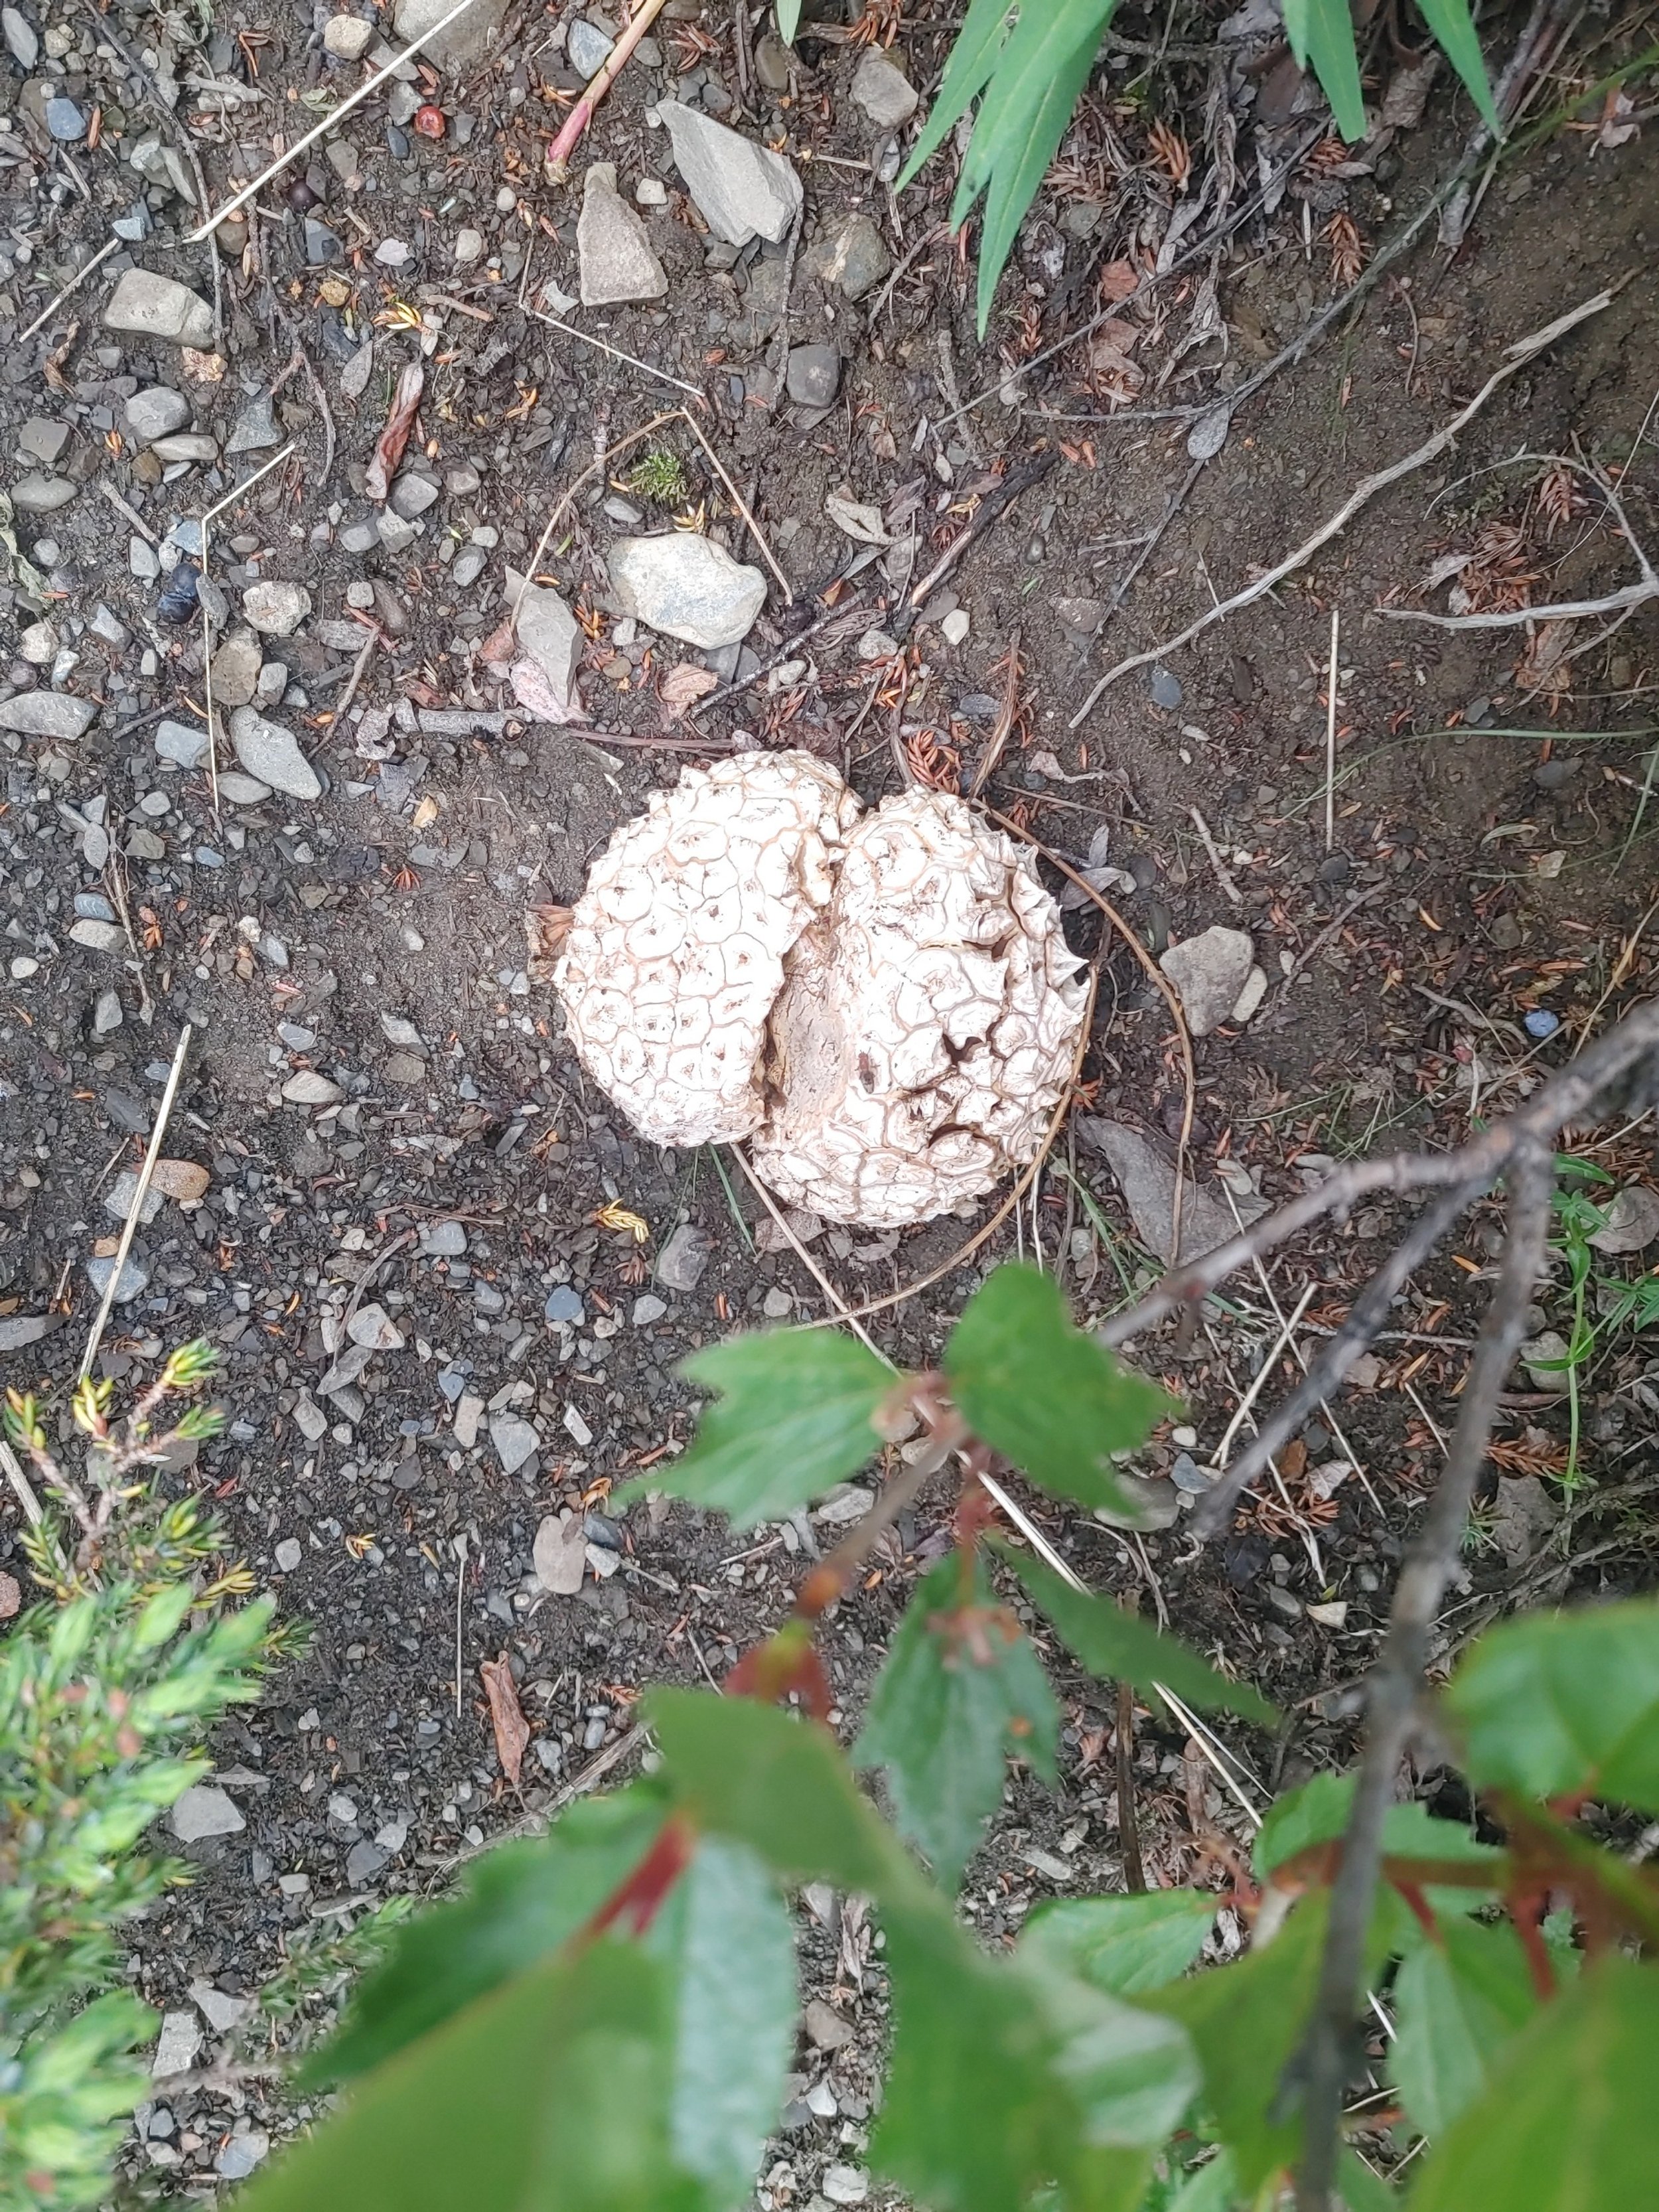  What type of mushroom is this? 